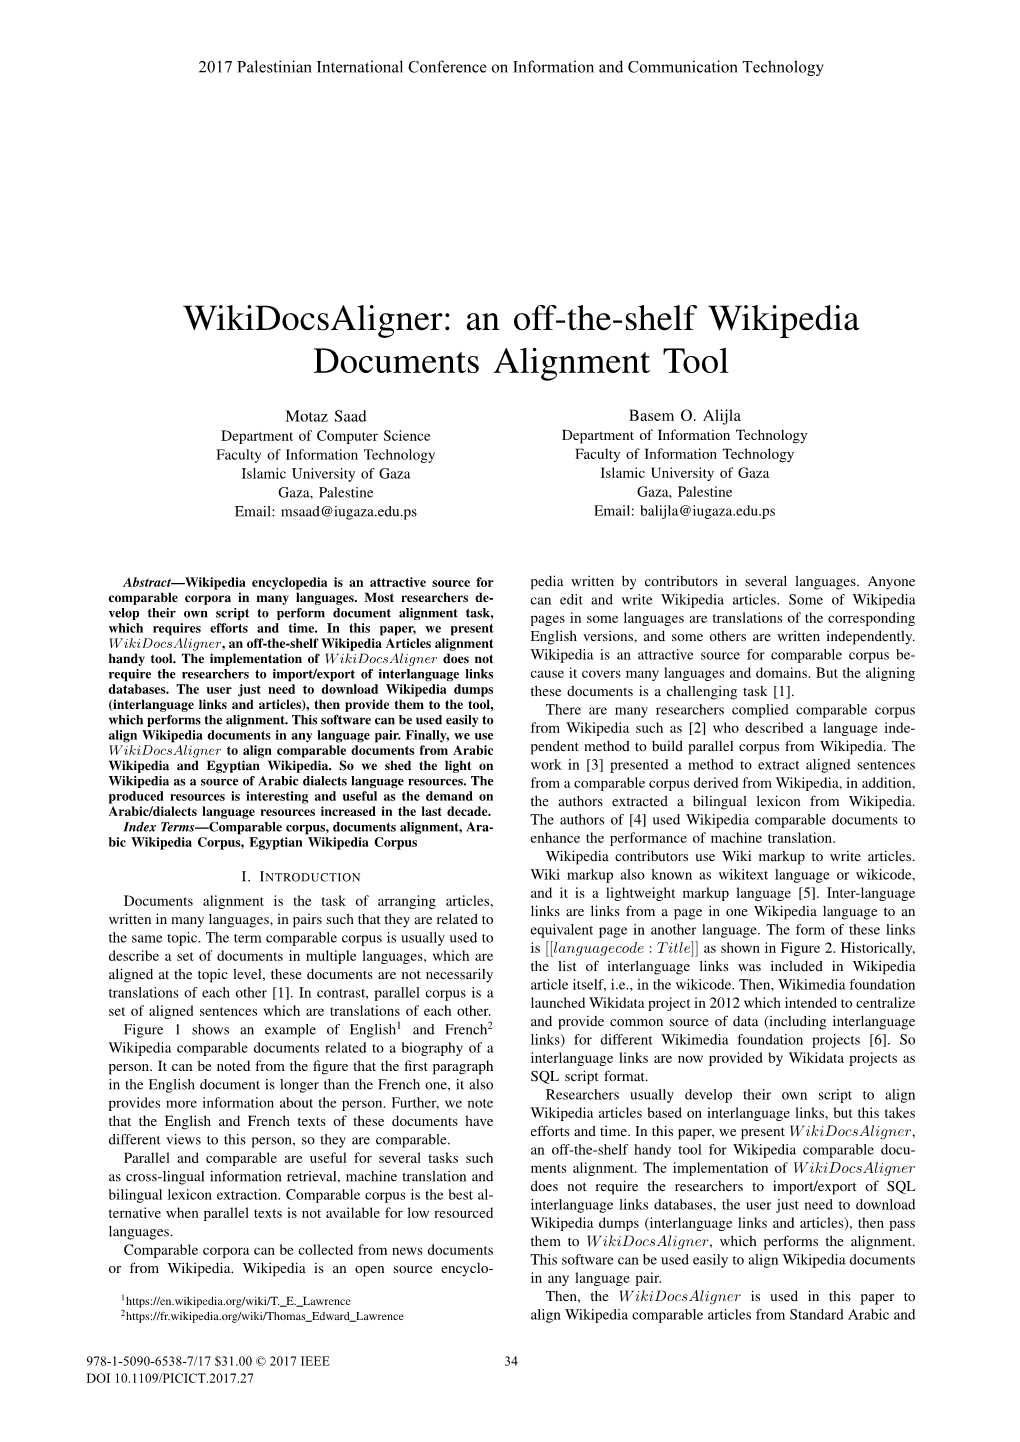 Wikidocsaligner: an Off-The-Shelf Wikipedia Documents Alignment Tool